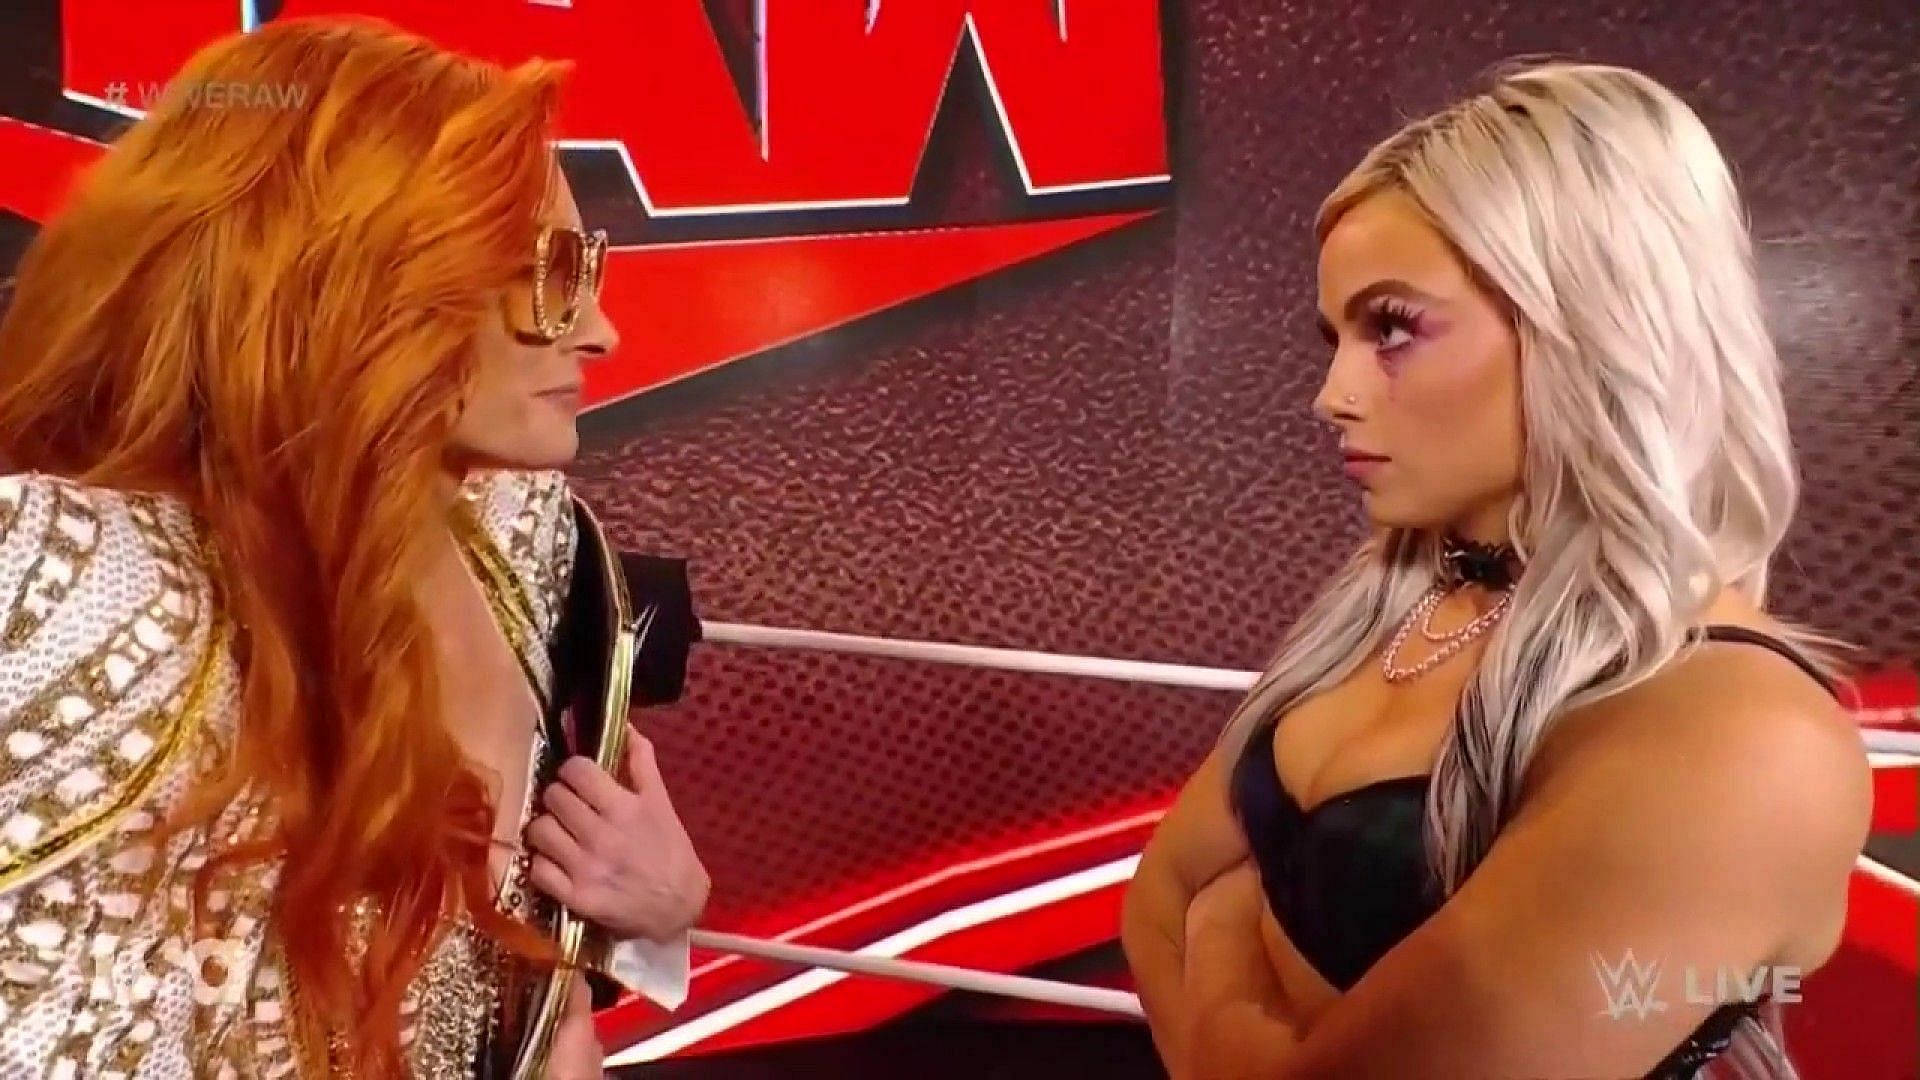 Becky Lynch set to defend her title against Liv Morgan